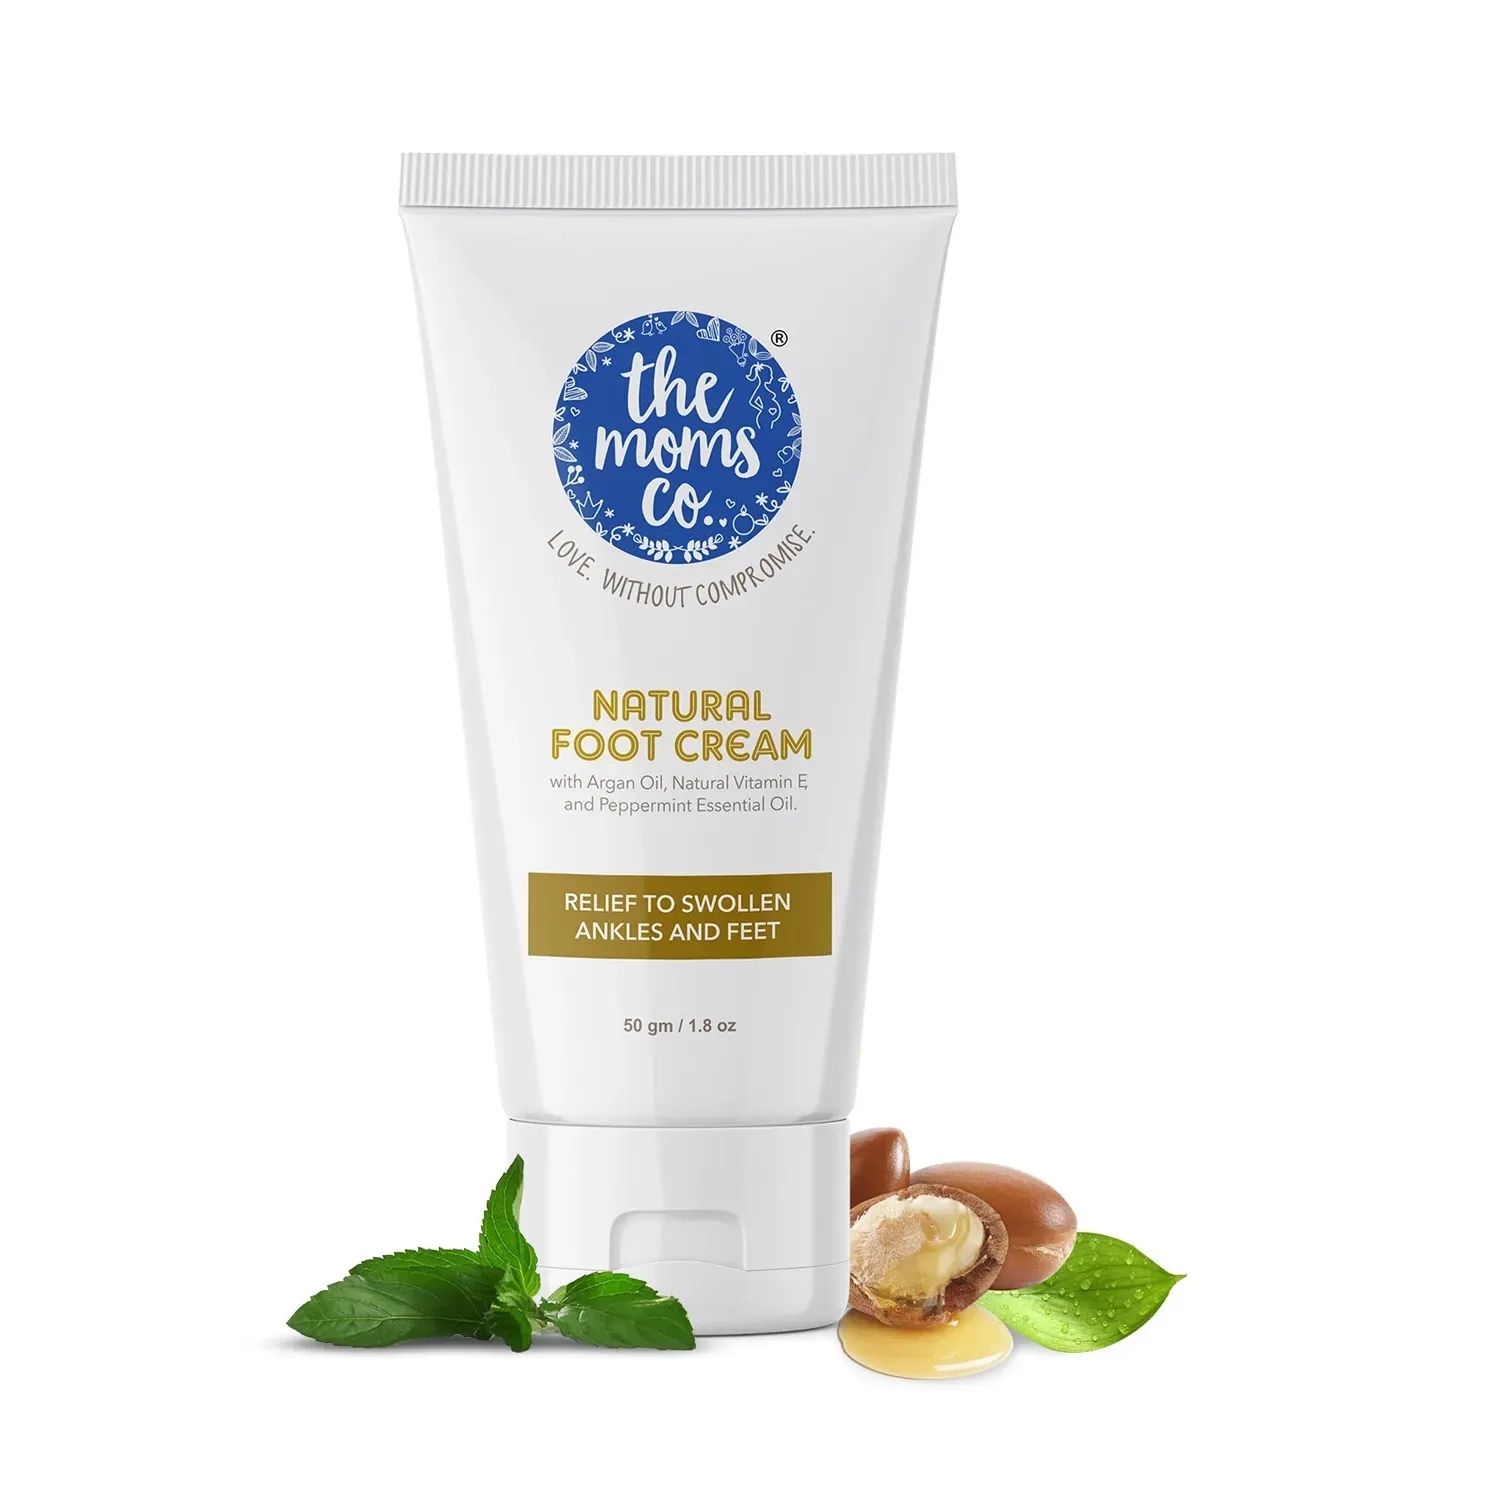 The Mom's Co. | The Mom's Co. Foot Cream (50g)